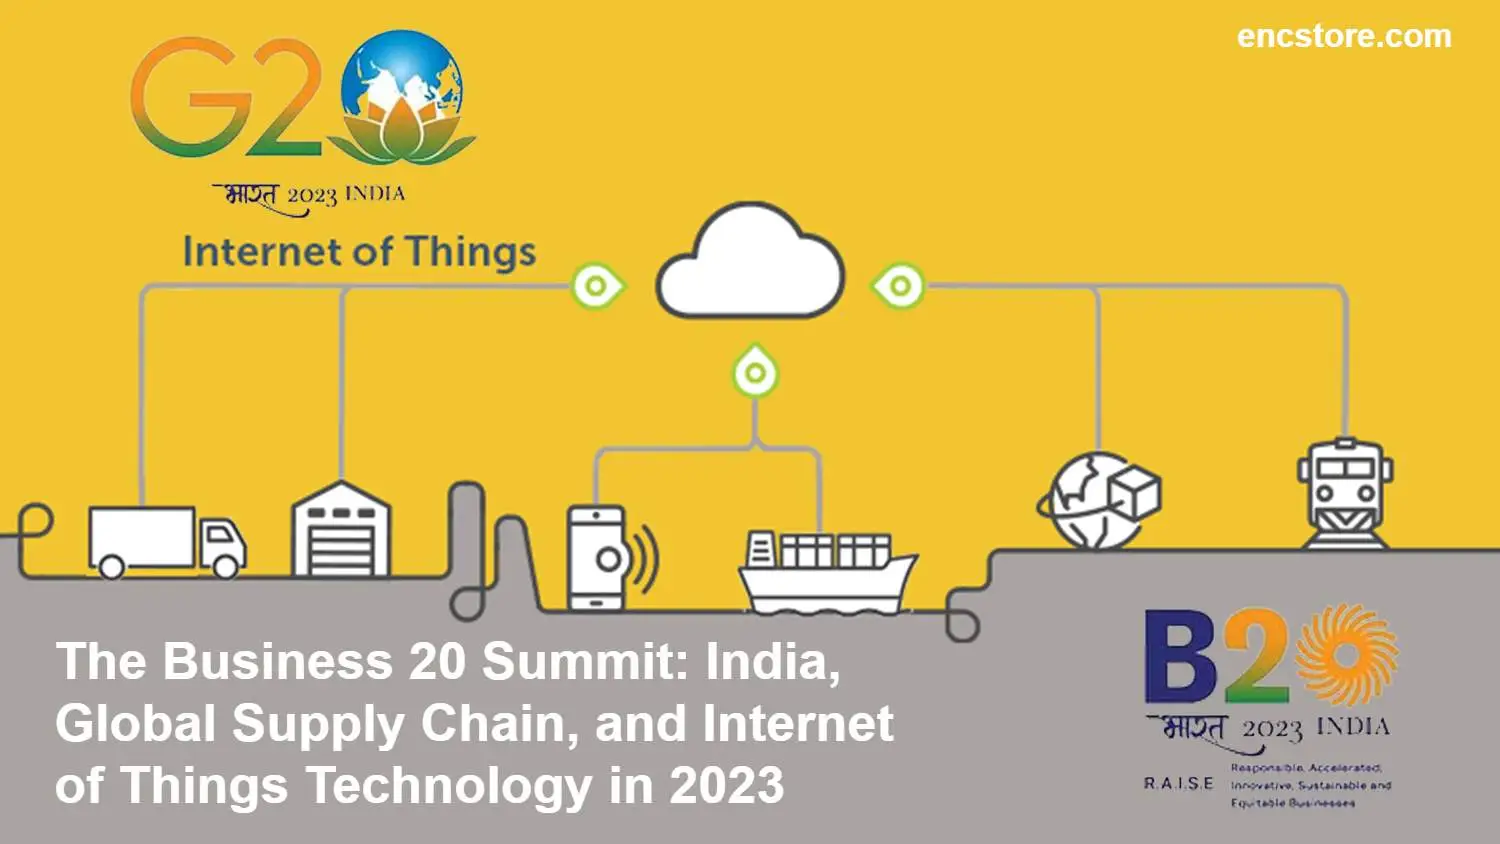 Internet of Things Technology in 2023